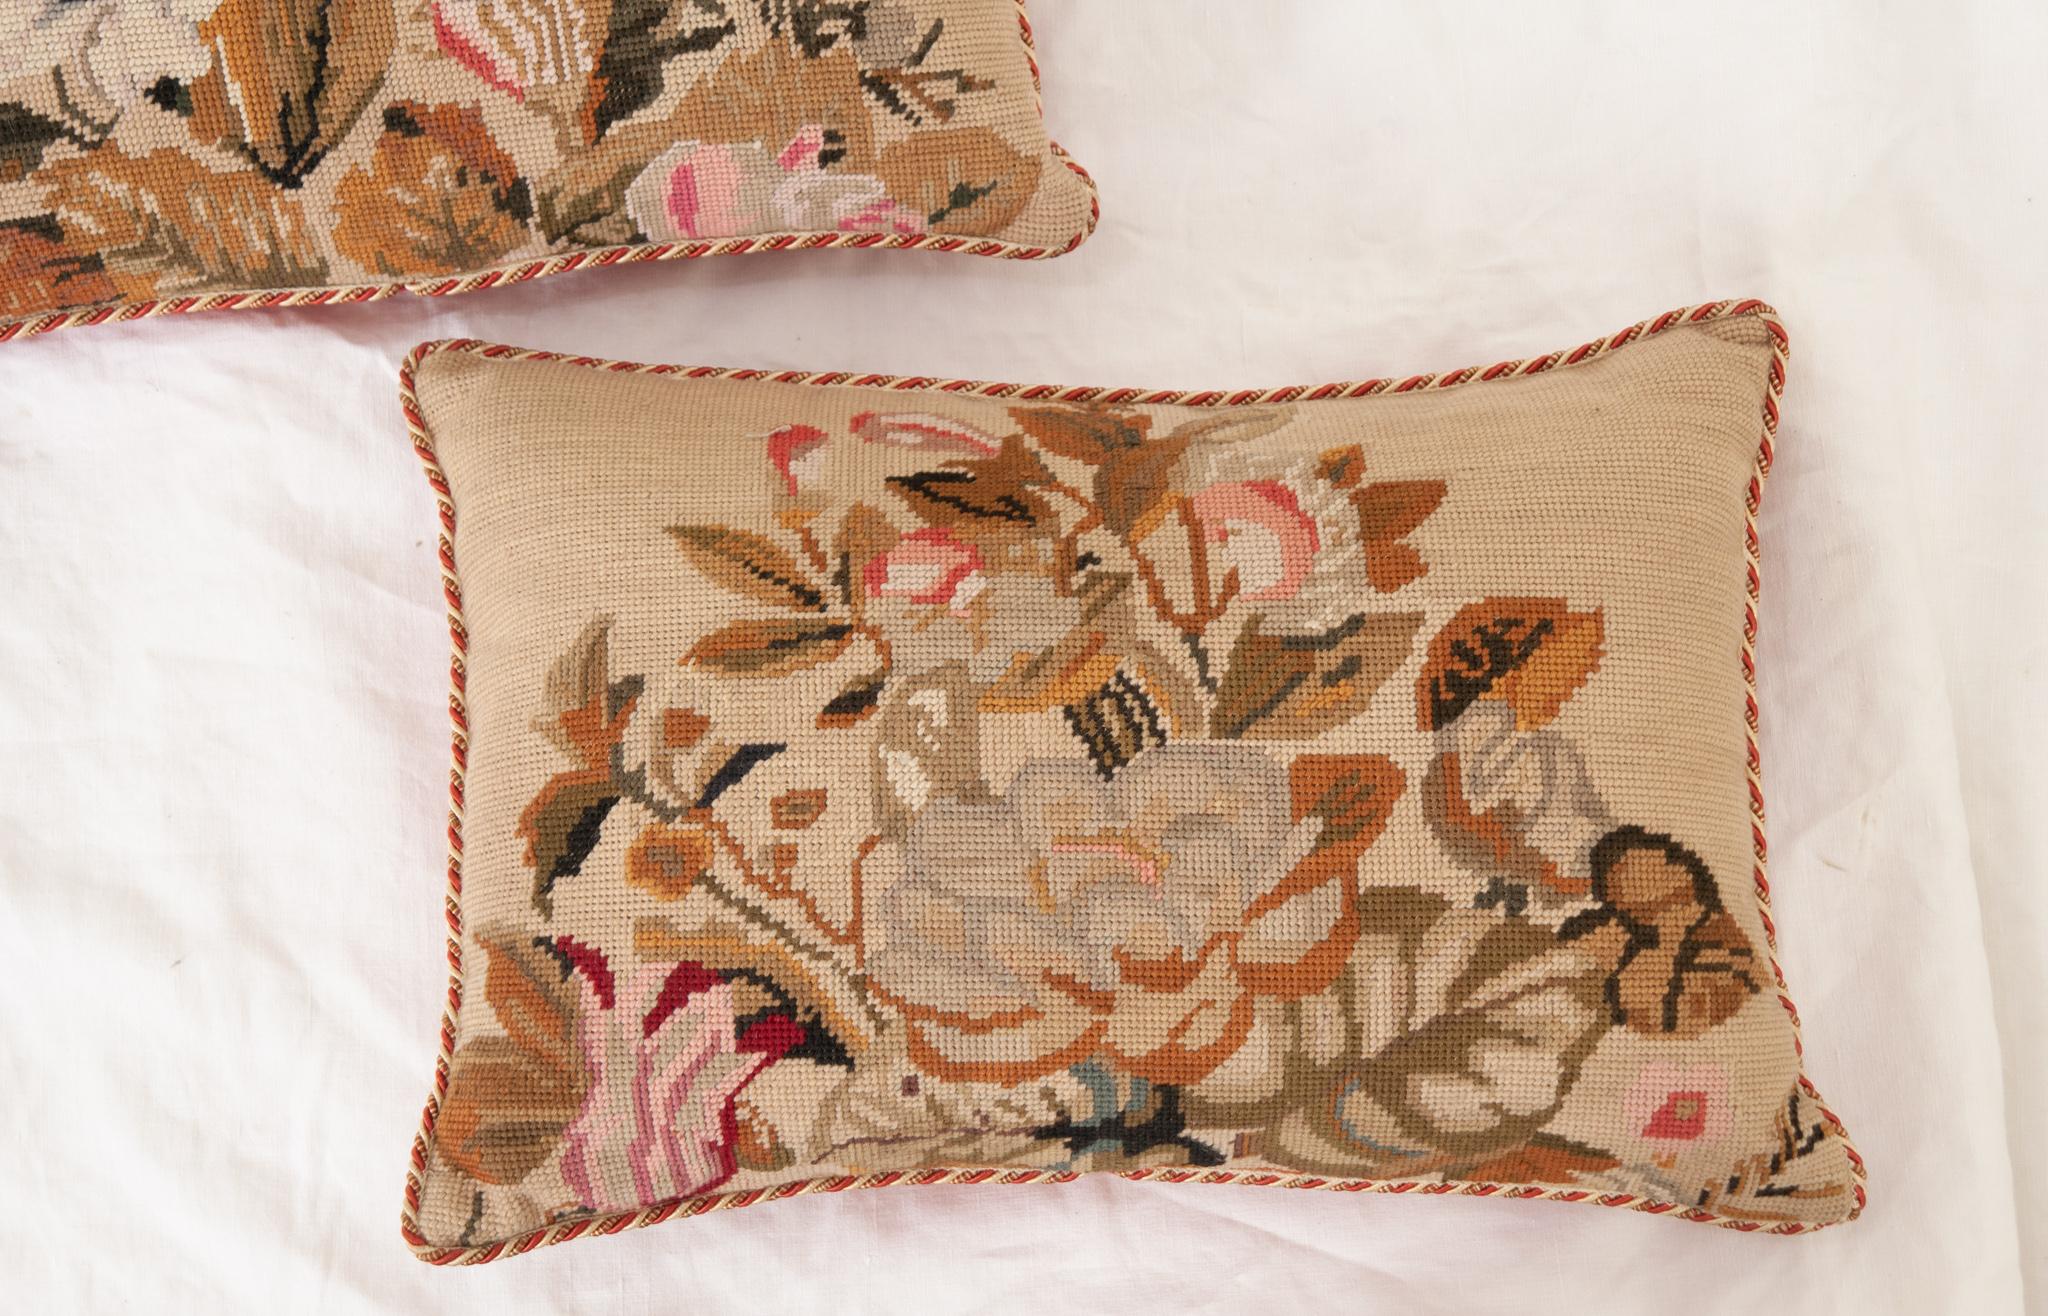 A vintage pair of needlepoint pillows are in great shape. All handmade with flowers and braided trim. The pillow cases have inset zippers and the pillow insert can be removed. Be sure to view the detailed images. 
